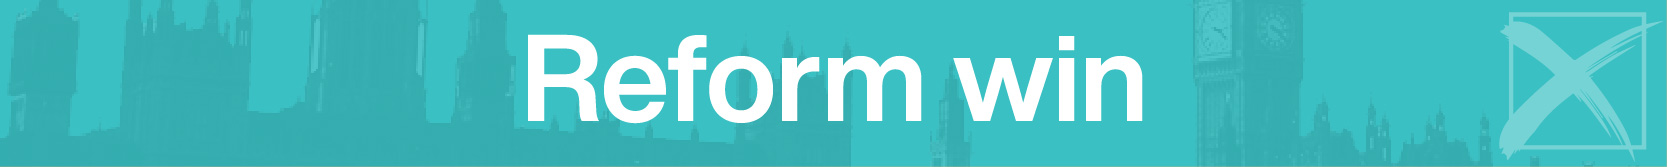 Banner graphic announcing a "Reform win" in white writing against a teal background with a faded image of the Houses of Parliament.